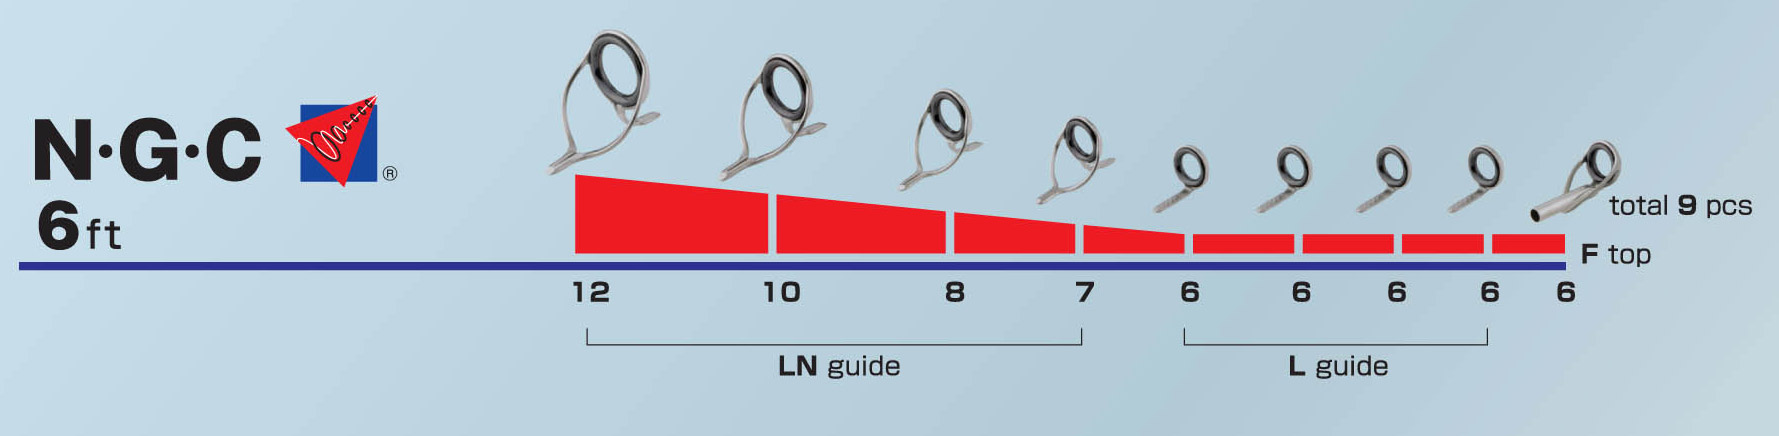 Guide Spacing Chart Saltwater Rods